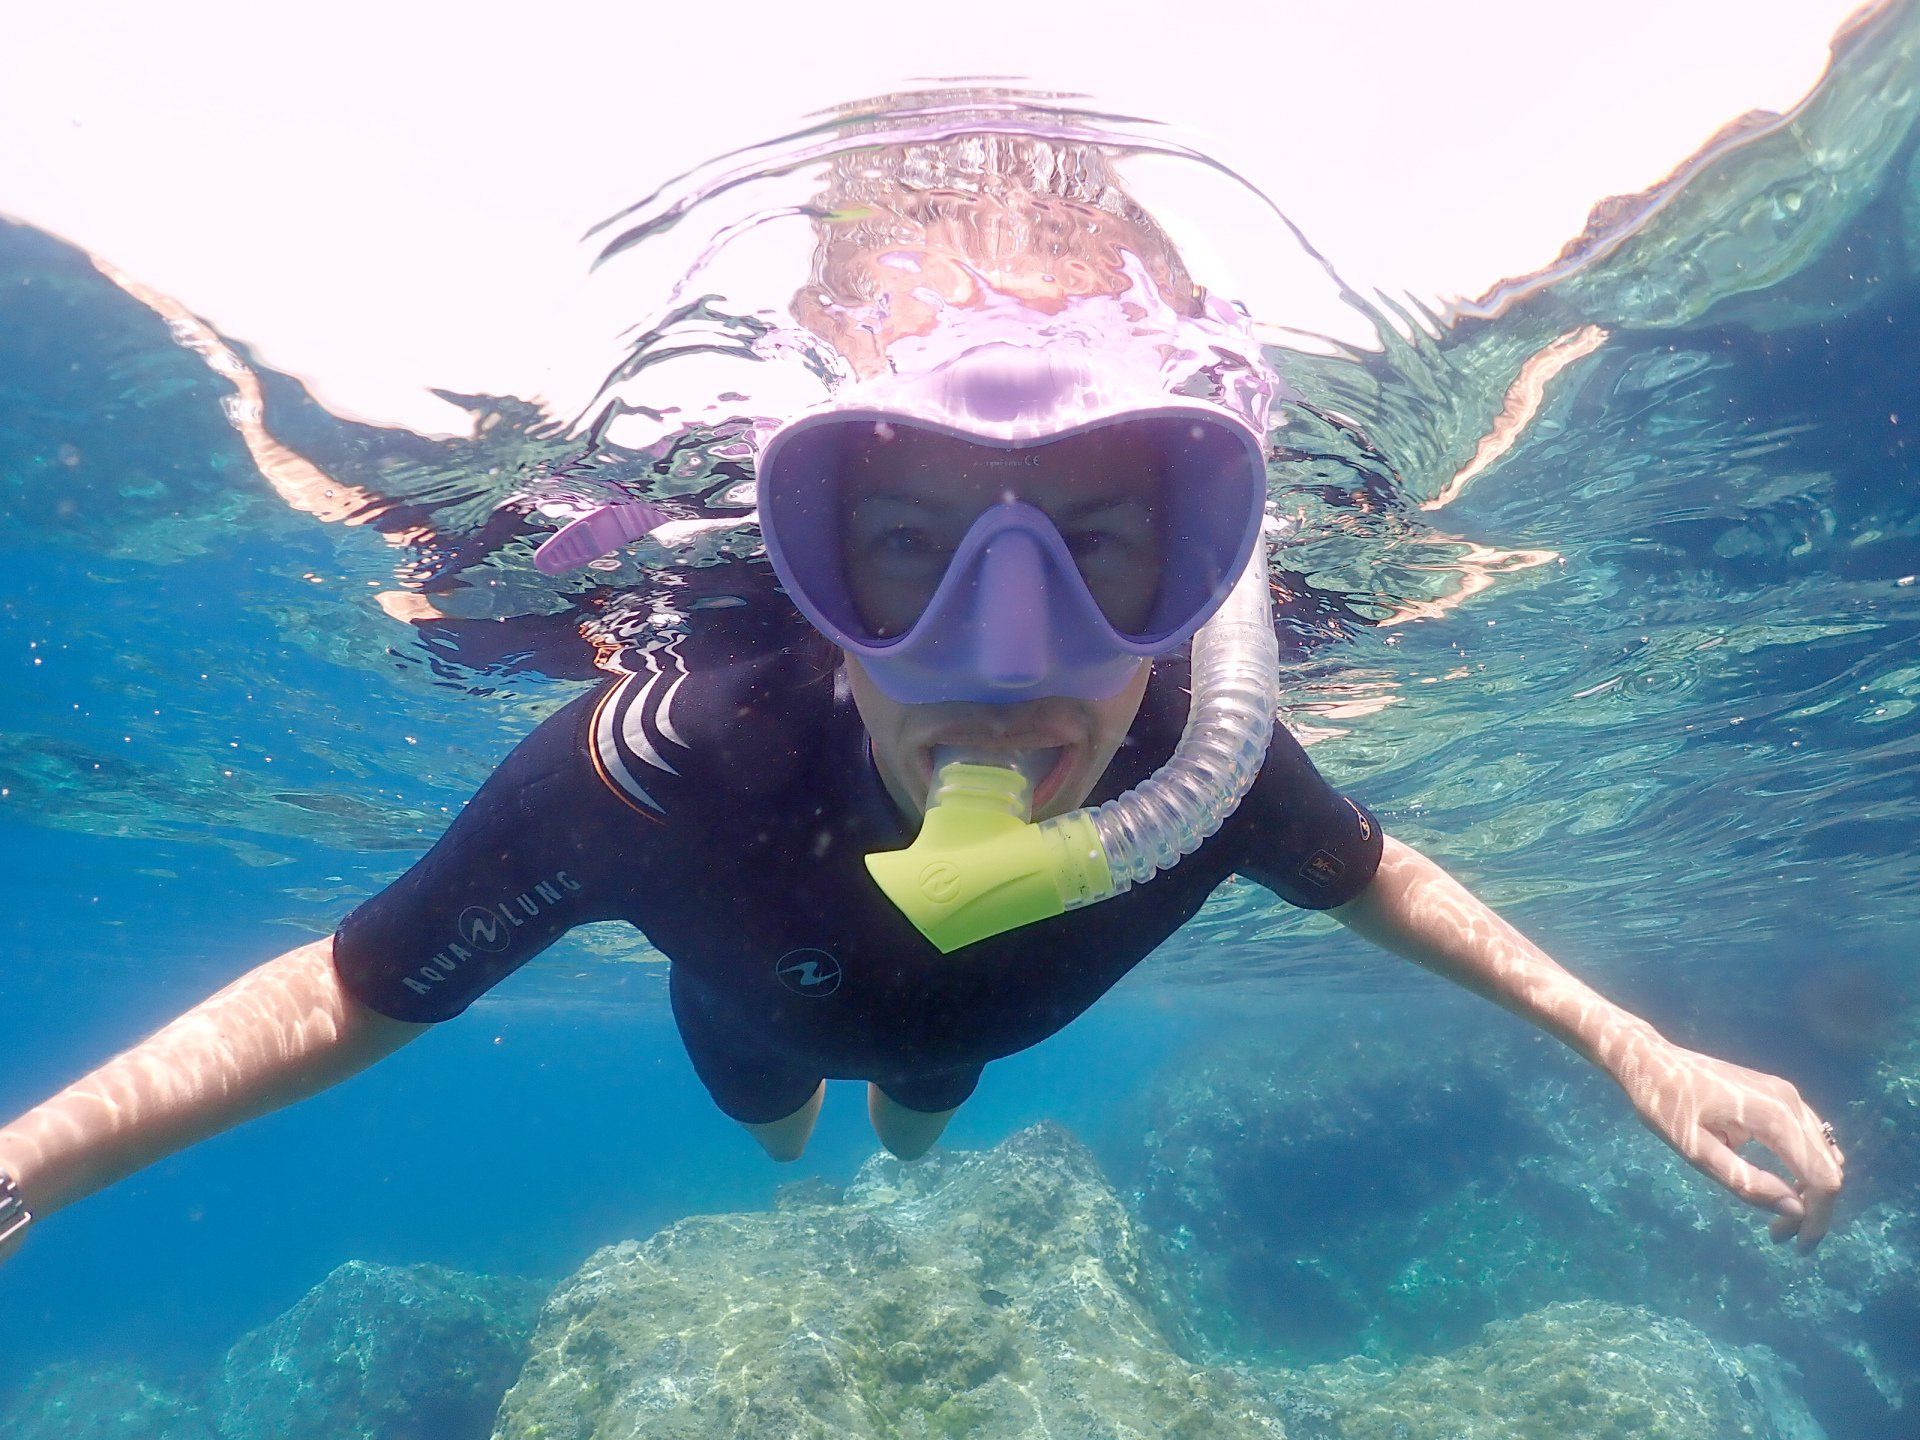 A person wearing a mask and snorkel is swimming in the ocean